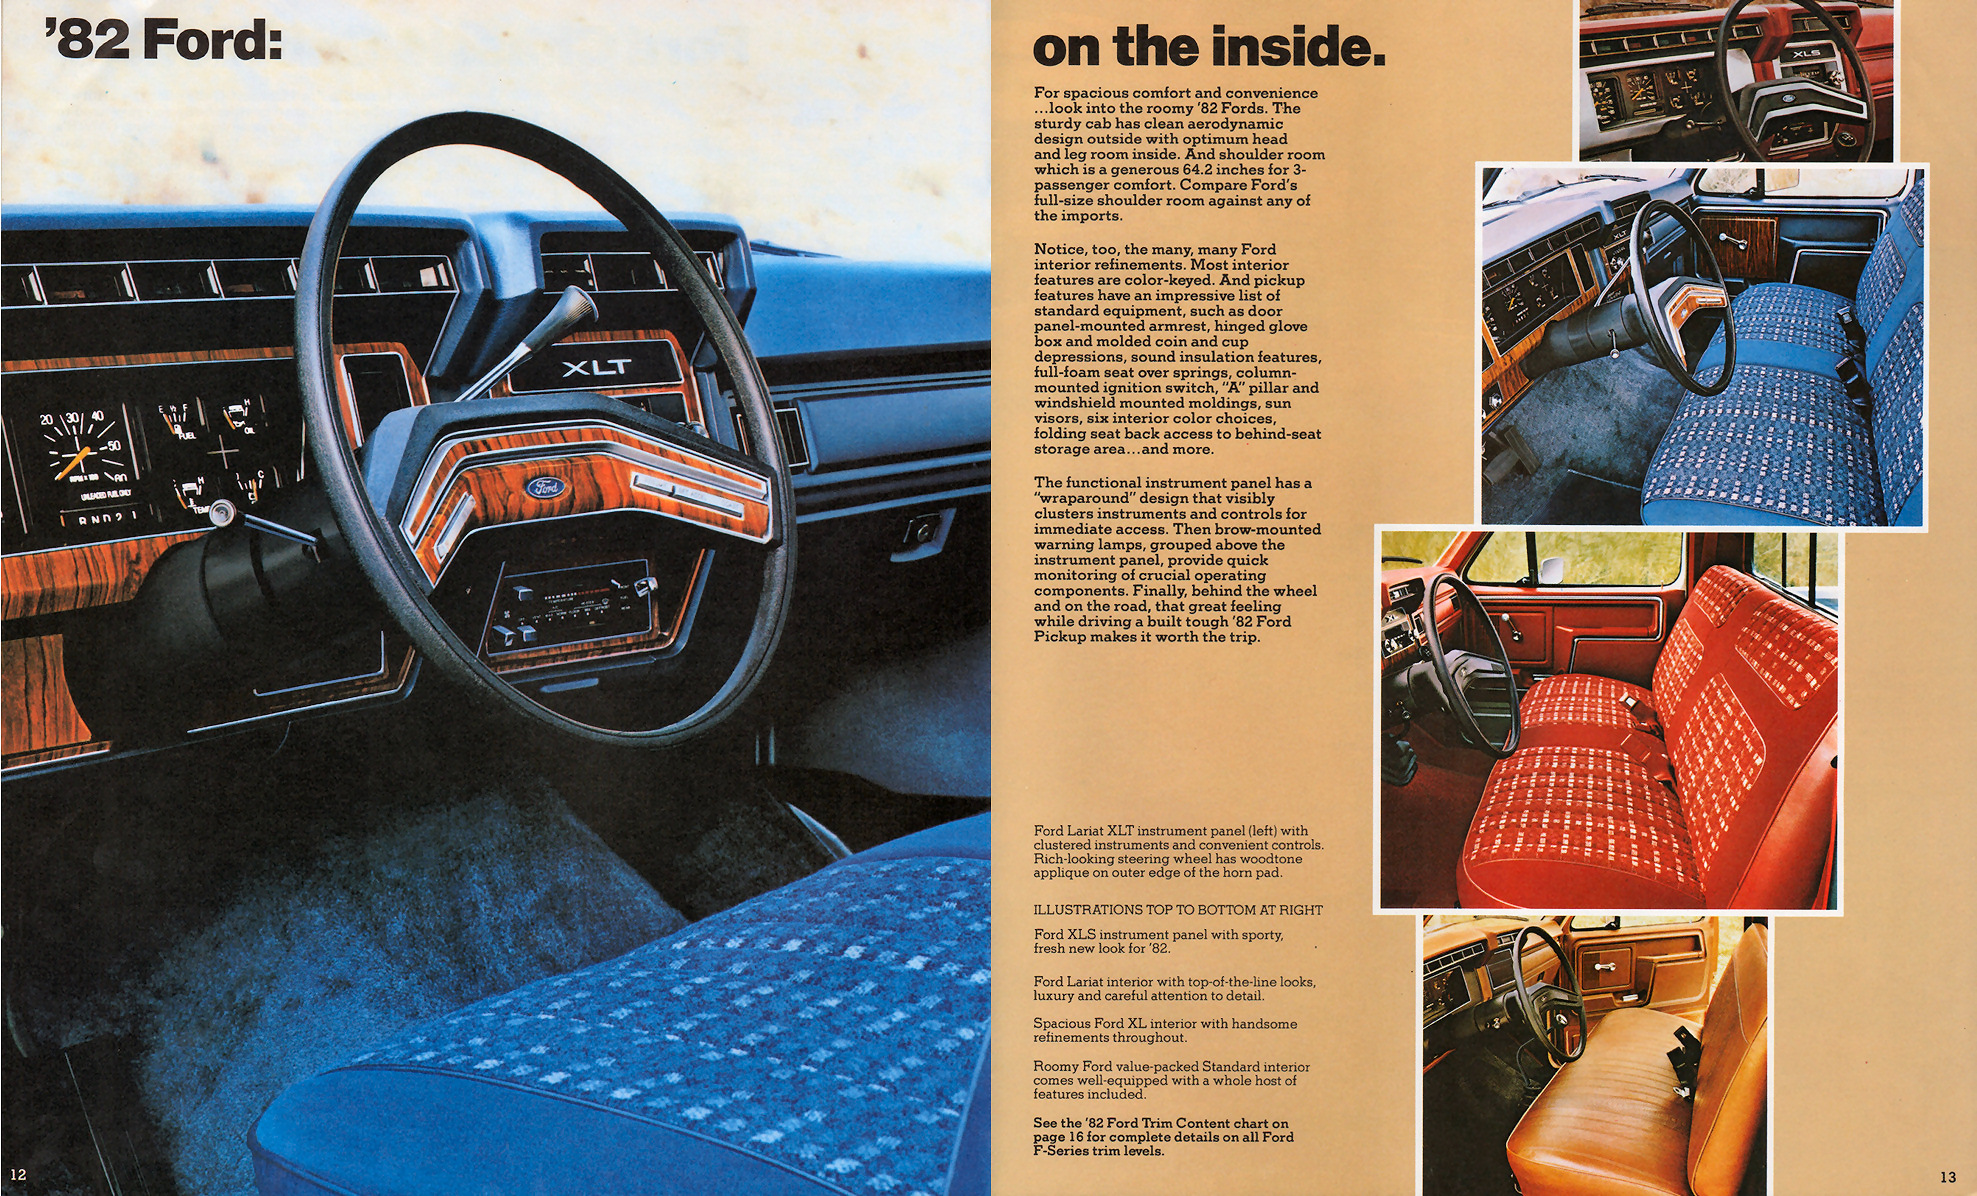 1982_Ford_Pickup-12-13